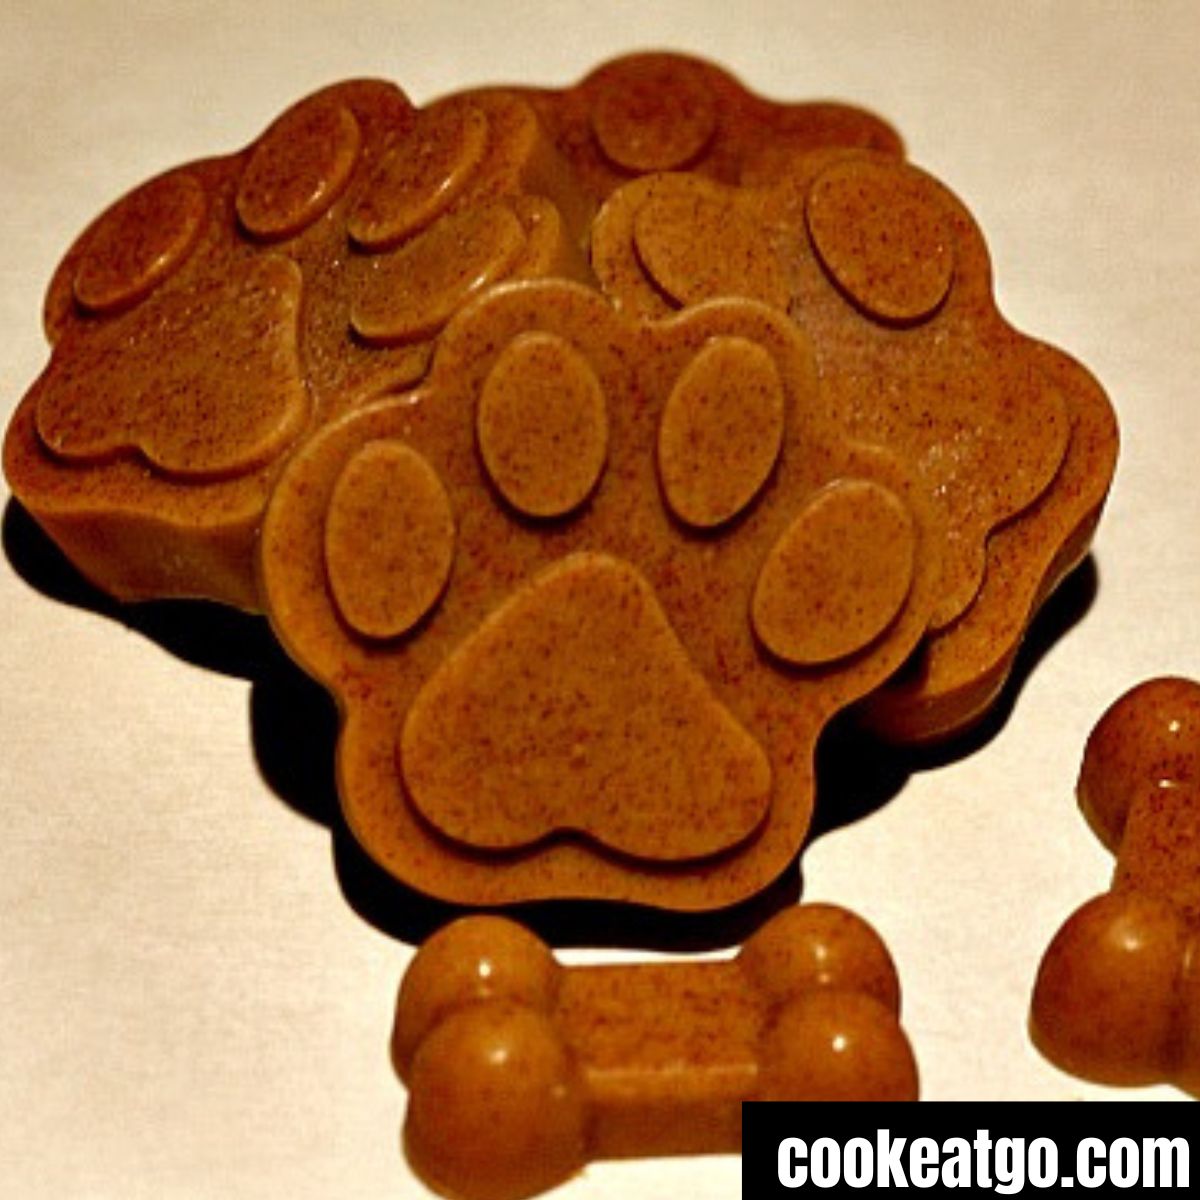 Homemade frozen coconut oil dog treats with peanut butter